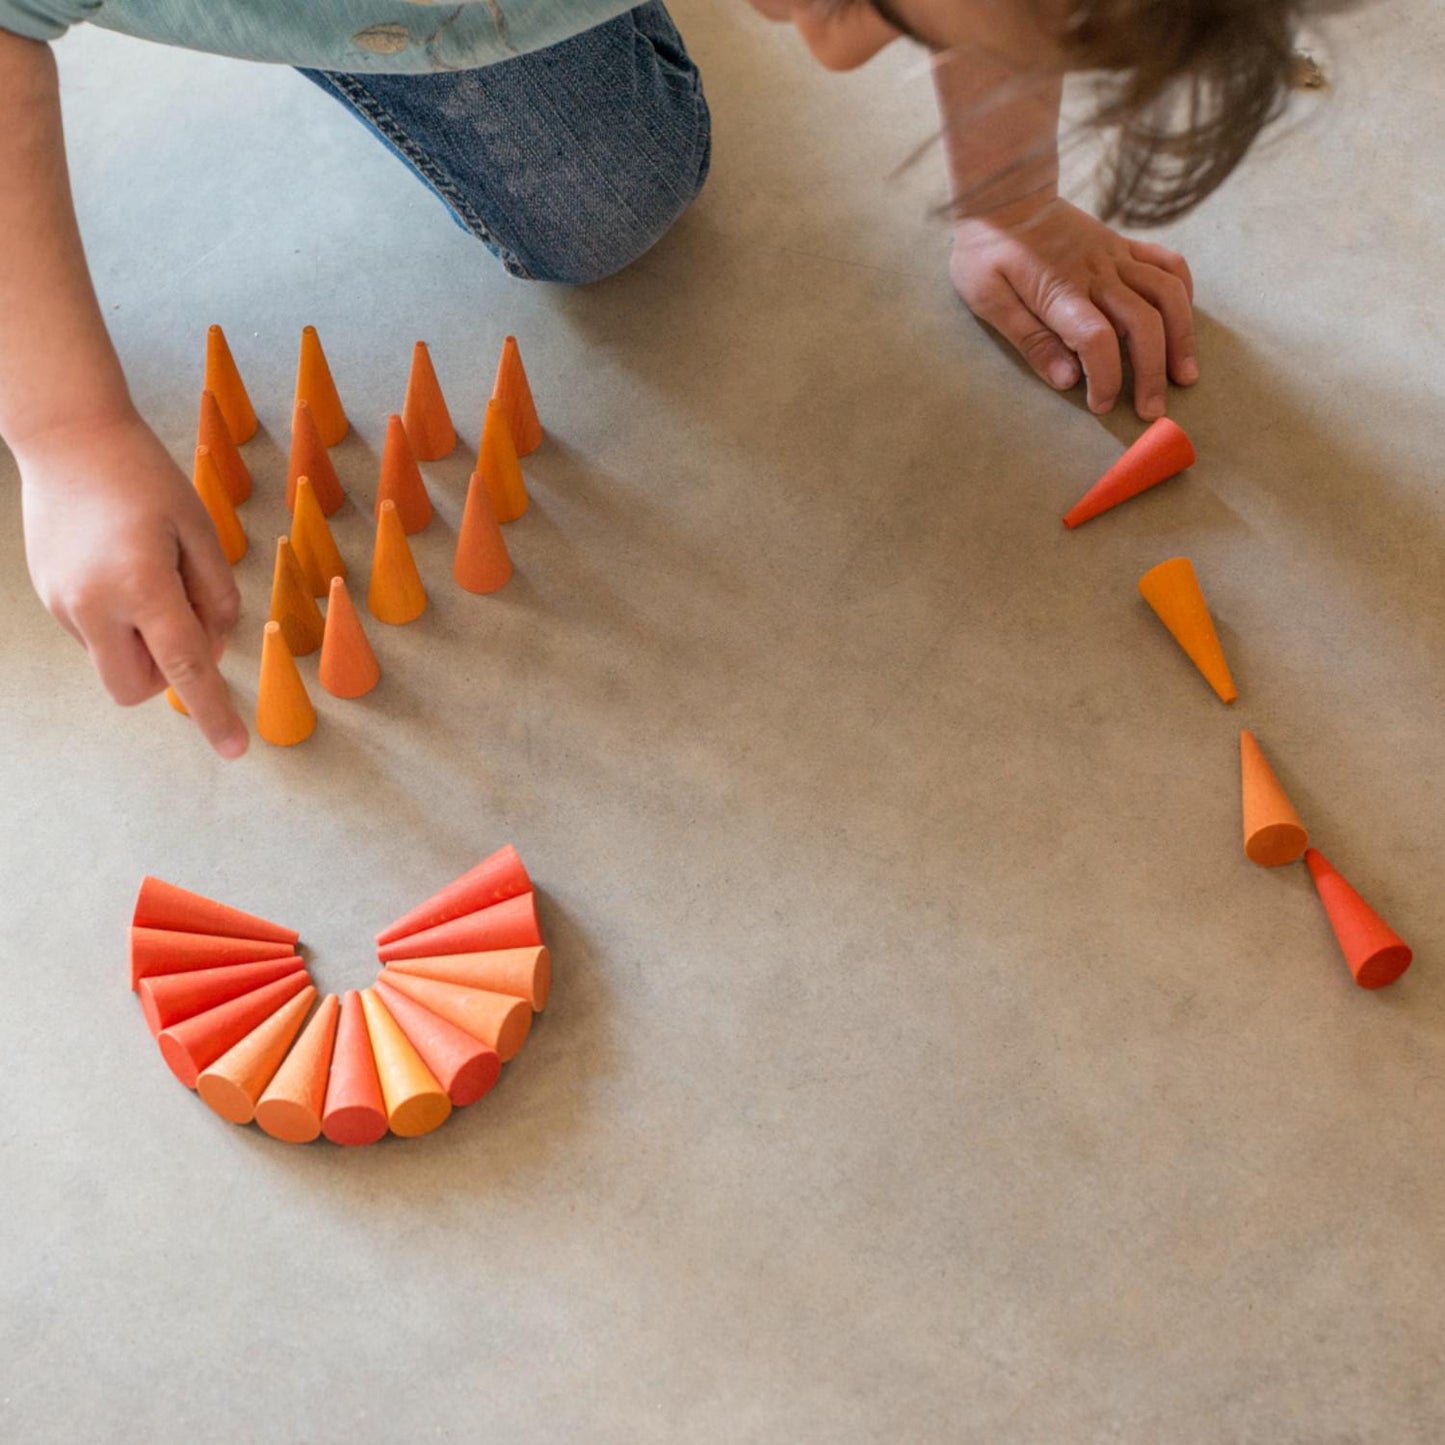 Mandala Orange Cones | 36 Pieces | Wooden Toys for Kids | Open-Ended Play